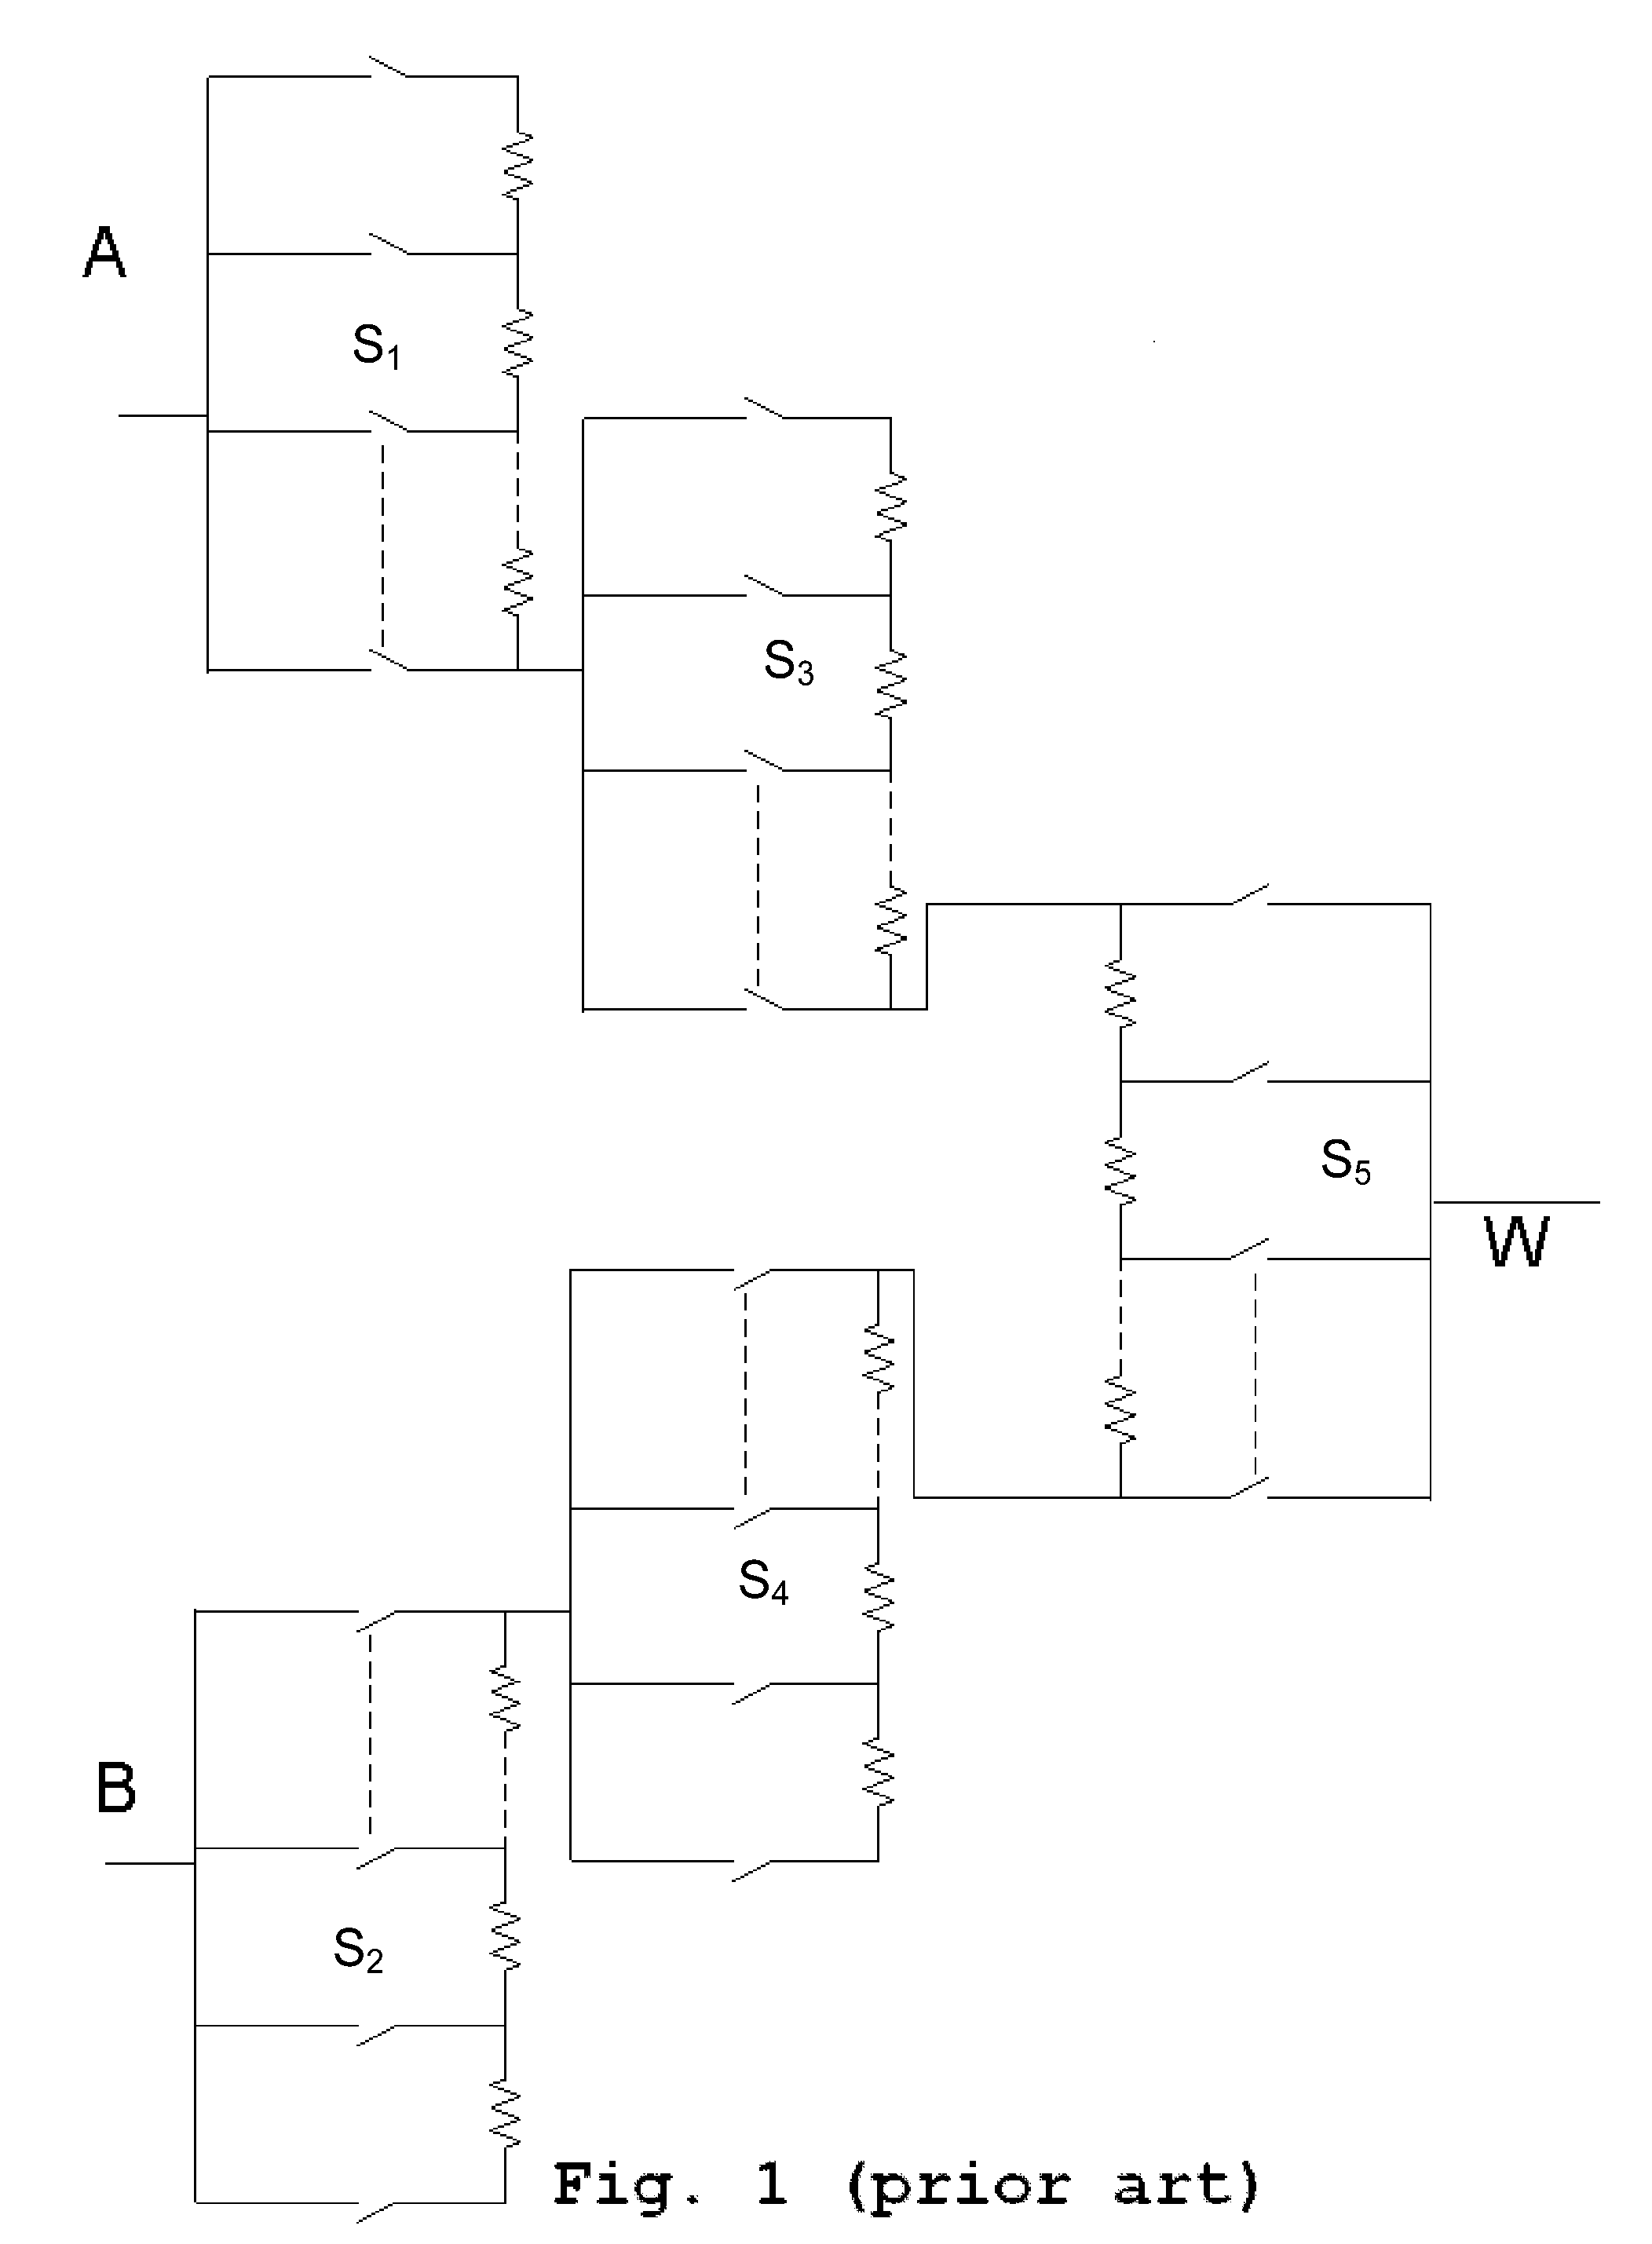 Digital potentiometer architecture with multiple string arrays allowing for independent calibration in rheostat mode